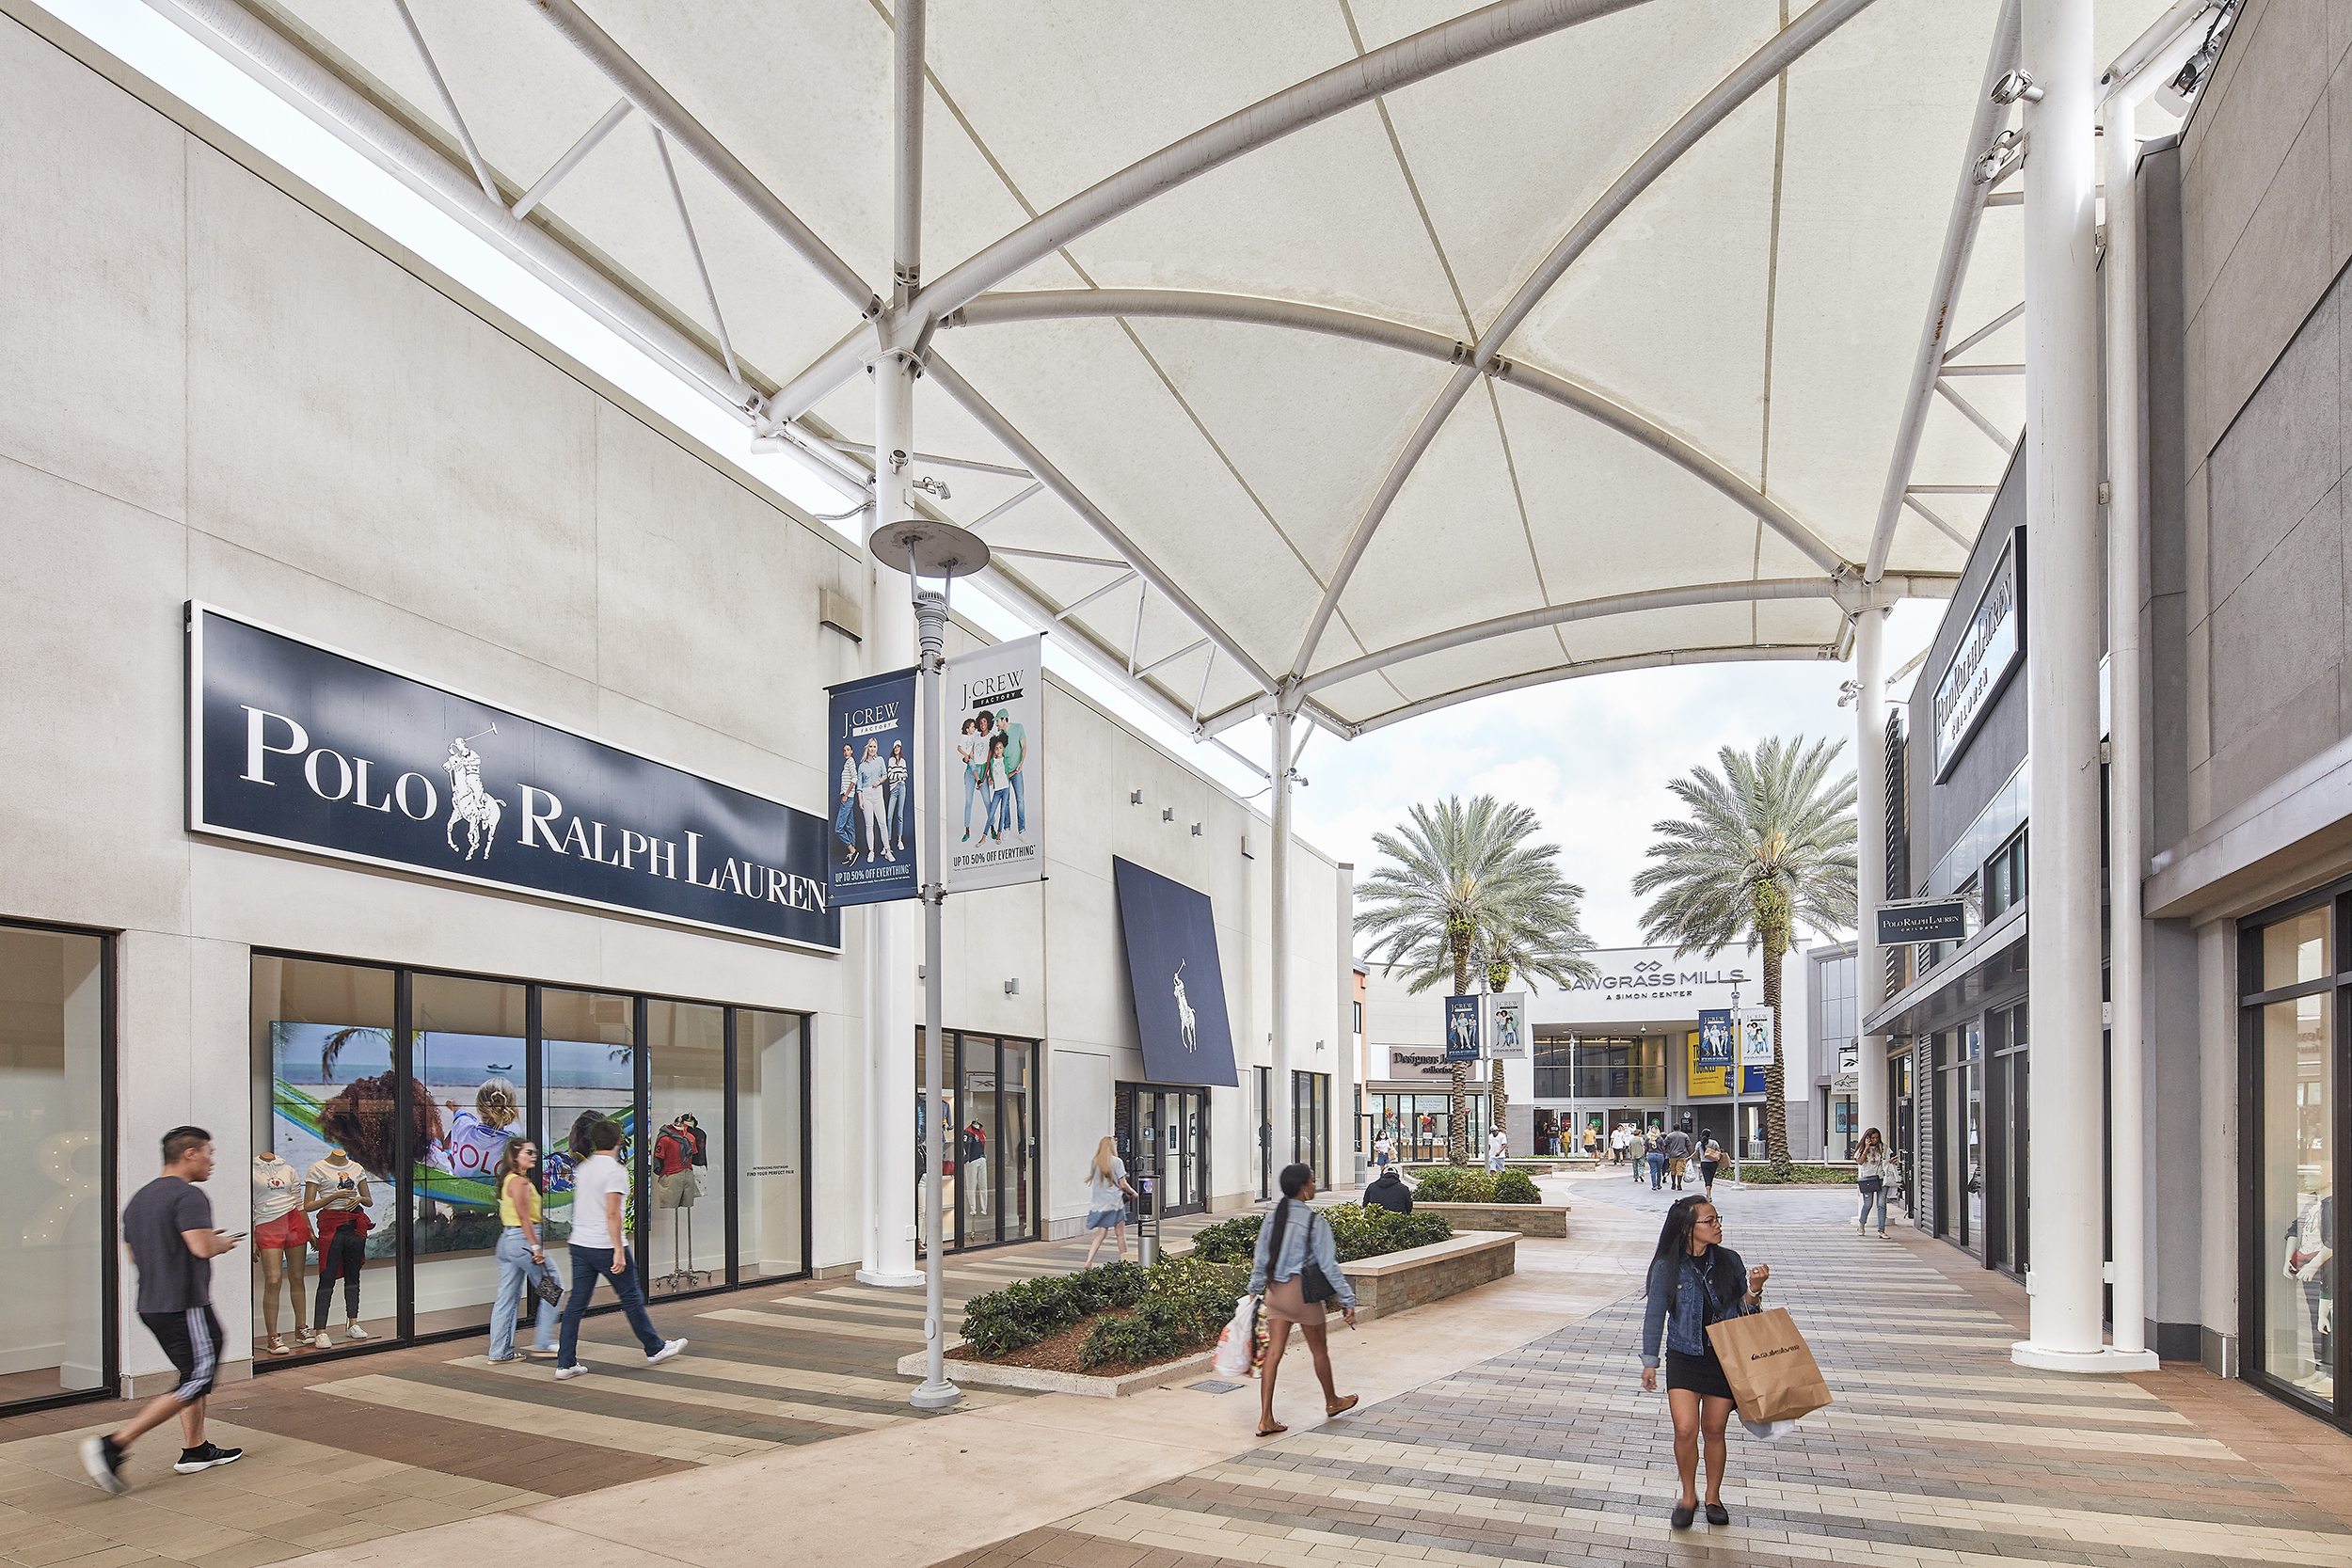 Sawgrass Mills Shopping and Outlet Center - FT Lauderdale, FLORIDA -  FEBRUARY 14, 2022 – Stock Editorial Photo © 4kclips #552001476